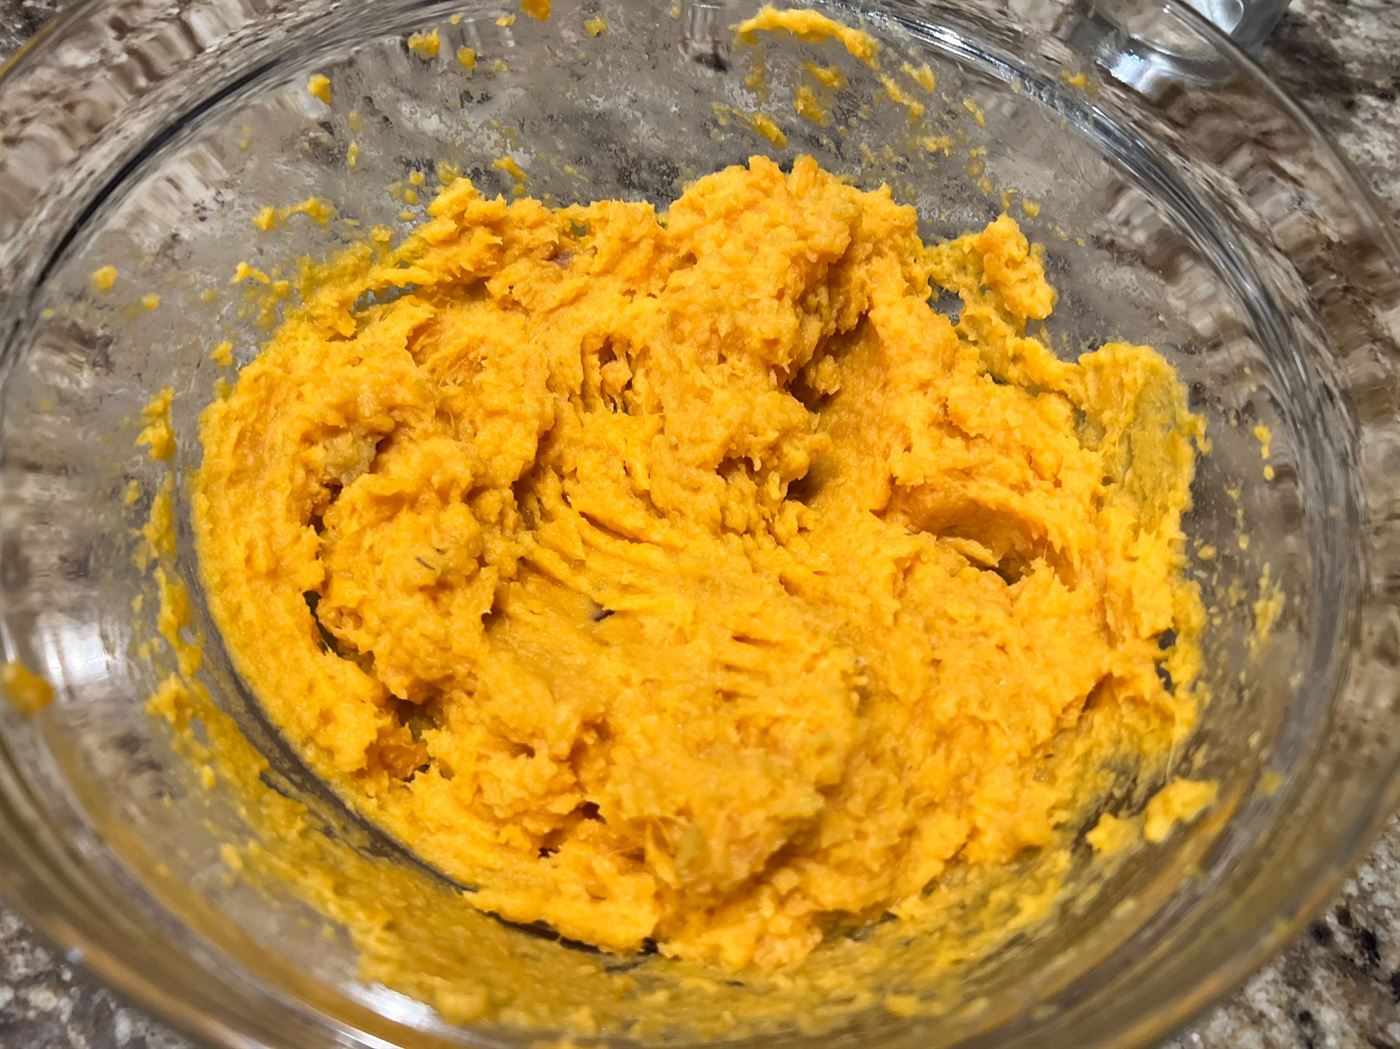 The sweet potato mixture will be light and fluffy after adding milk and butter. Samantha Bailey | The Montclarion